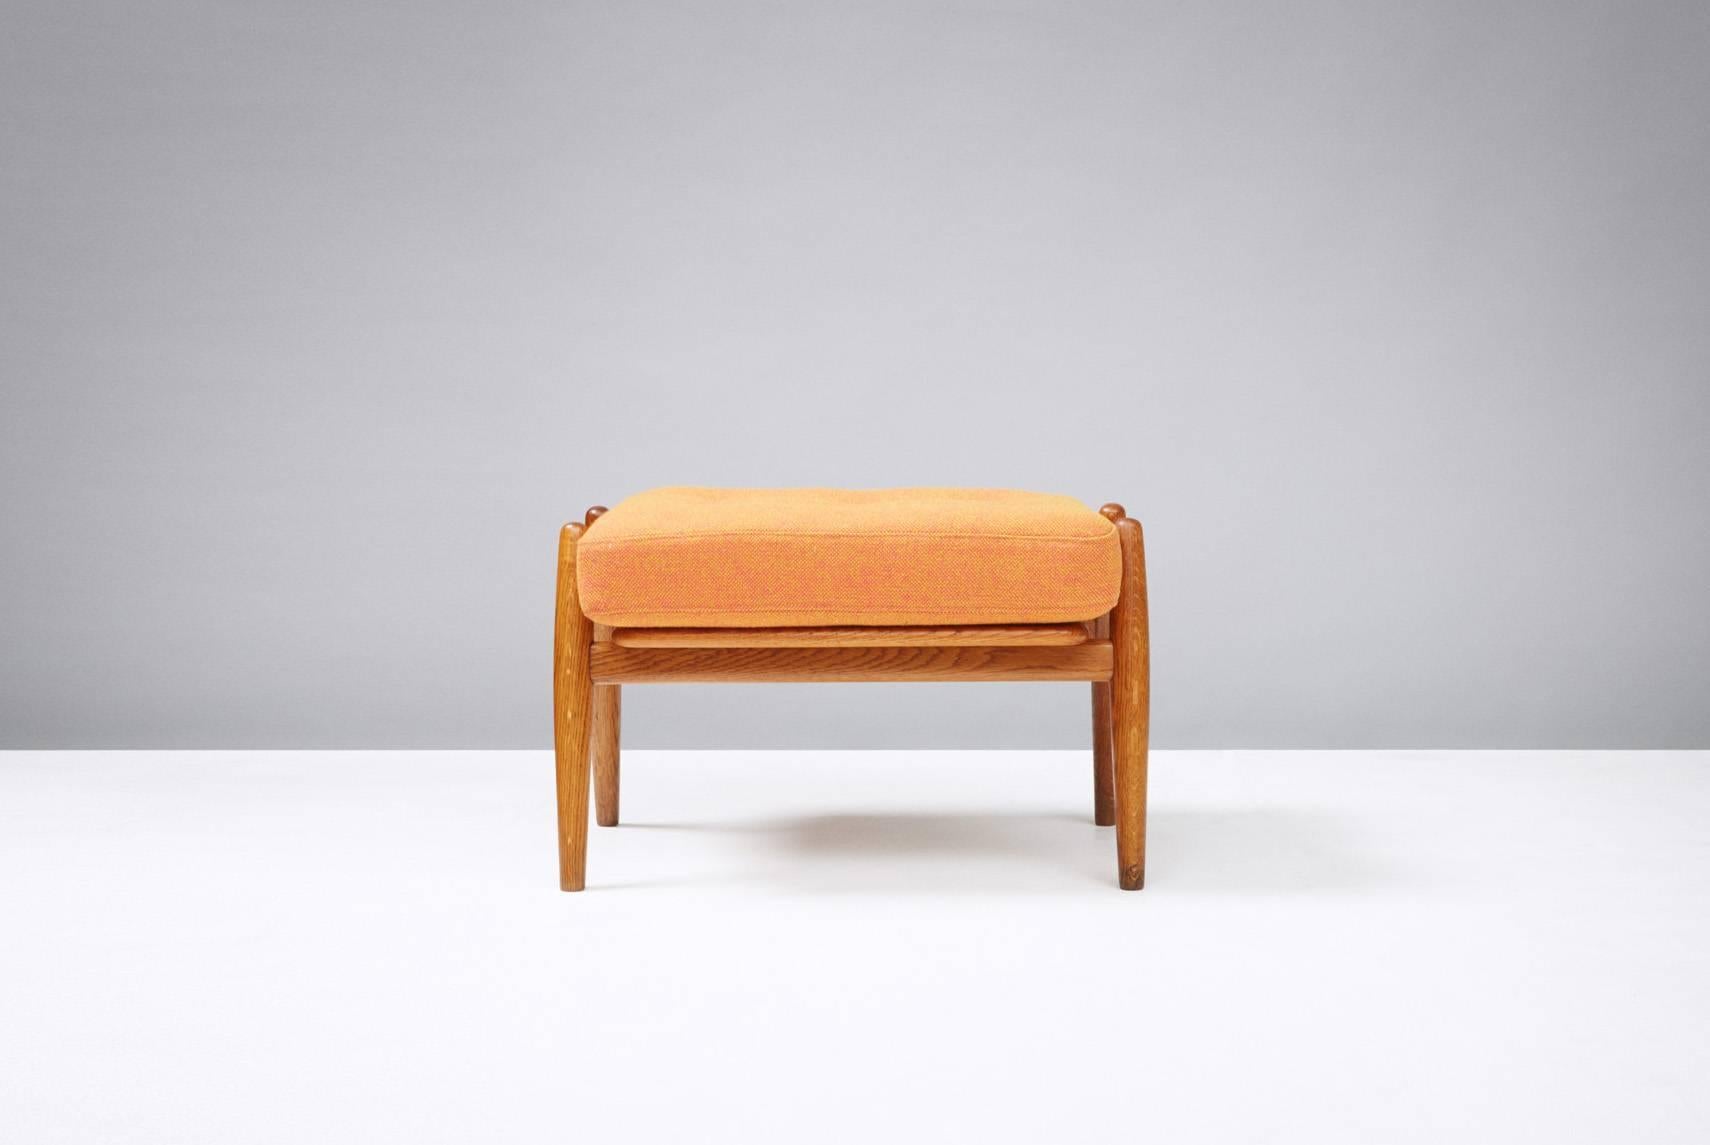 Produced by GETAMA, Gedsted, Denmark. Oak with original sprung cushion reupholstered in Kvadrat Hallingdal wool fabric.

Other upholstery options available by request.